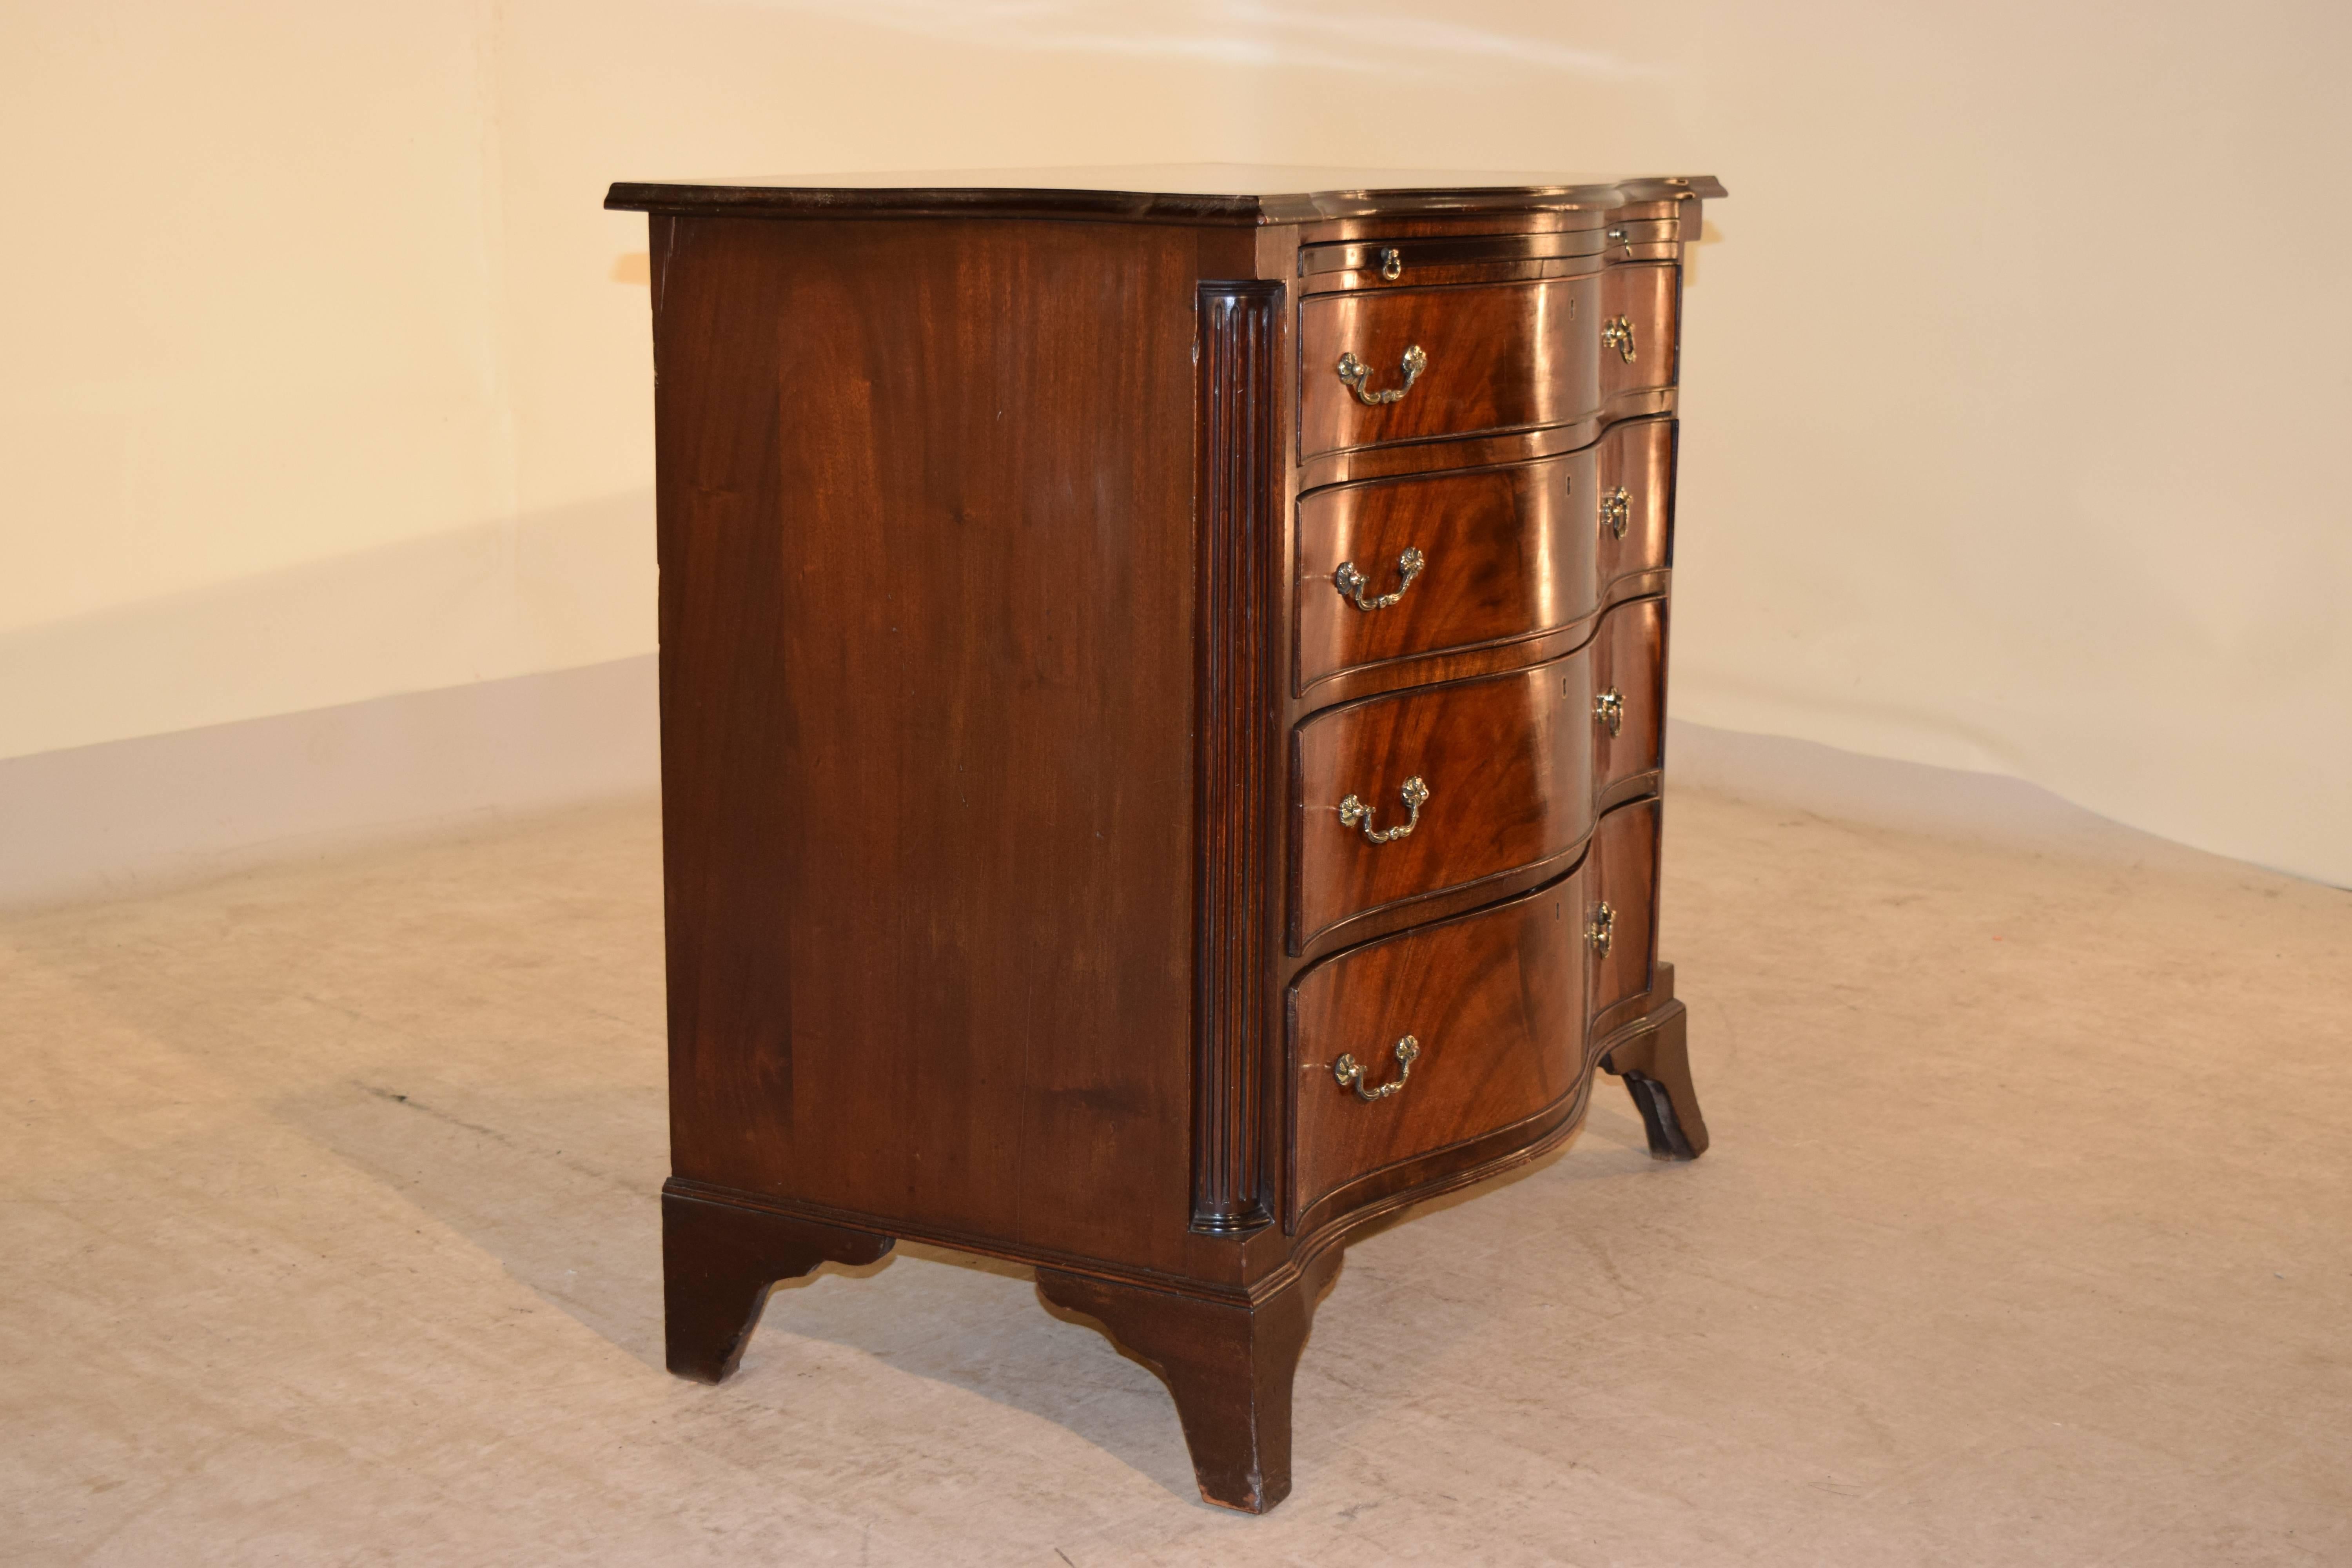 English mahogany small chest with a beveled edge around the top, following down to four graduated drawers, which are serpentine shaped and flanked by reeded columns. The case is raised on tall bracket feet, circa 1920.